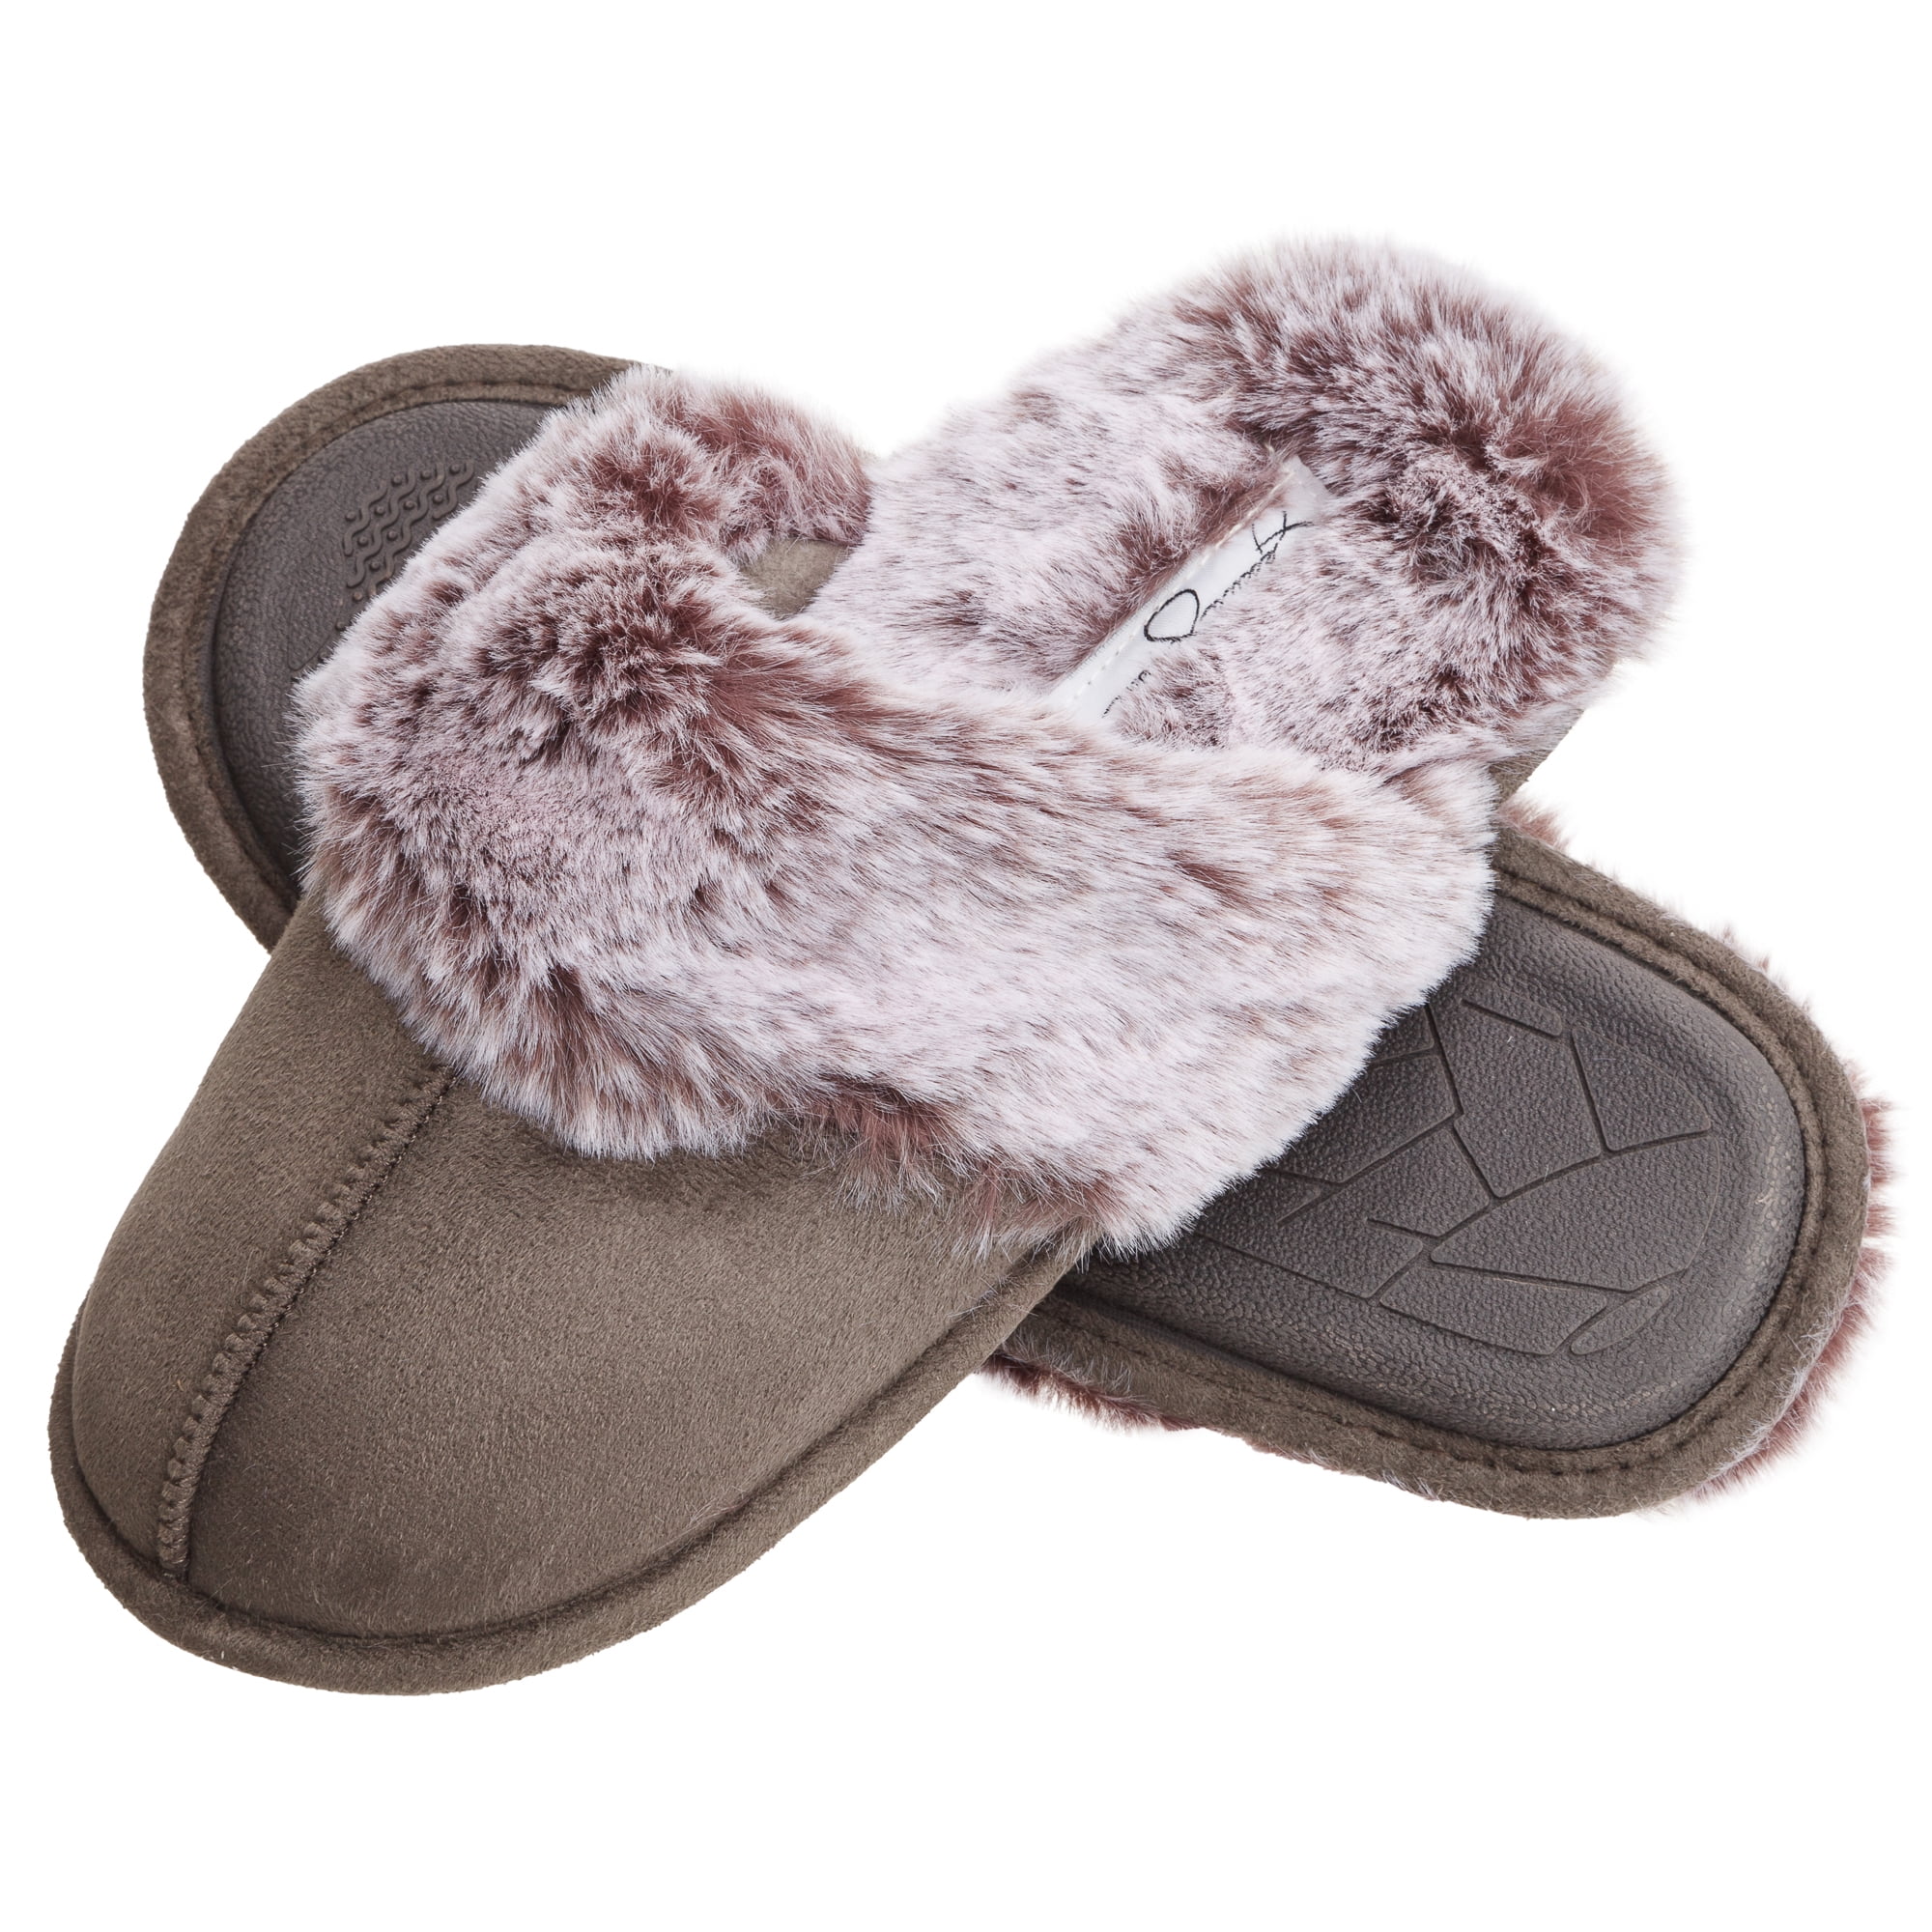 Moccasins Slip on Sheepskin Slippers for Woman Memory Foam Breathable Anti Slip Ourdoor Indoor House Shoes with Fuzzy Plush Faux Fur Lining Hoswo Womens Slippers